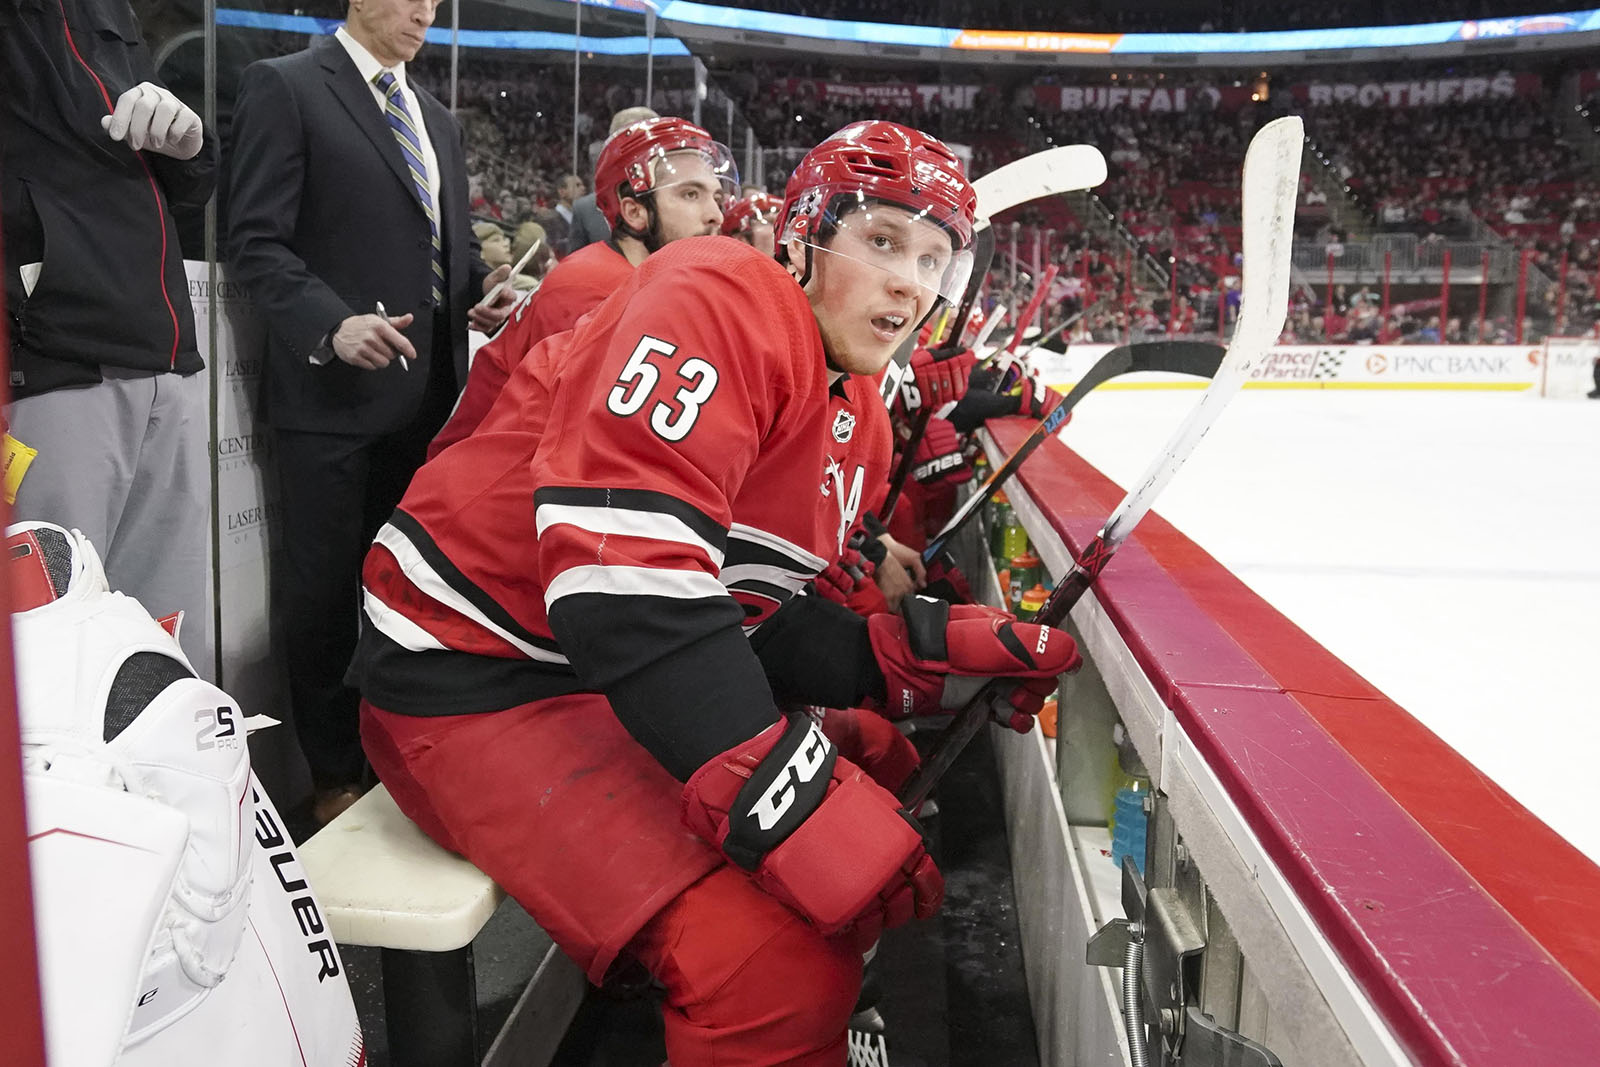 The Carolina Hurricanes welcome Jeff Skinner of the Buffalo Sabres, once a  teammate, now an opponent - Canes Country